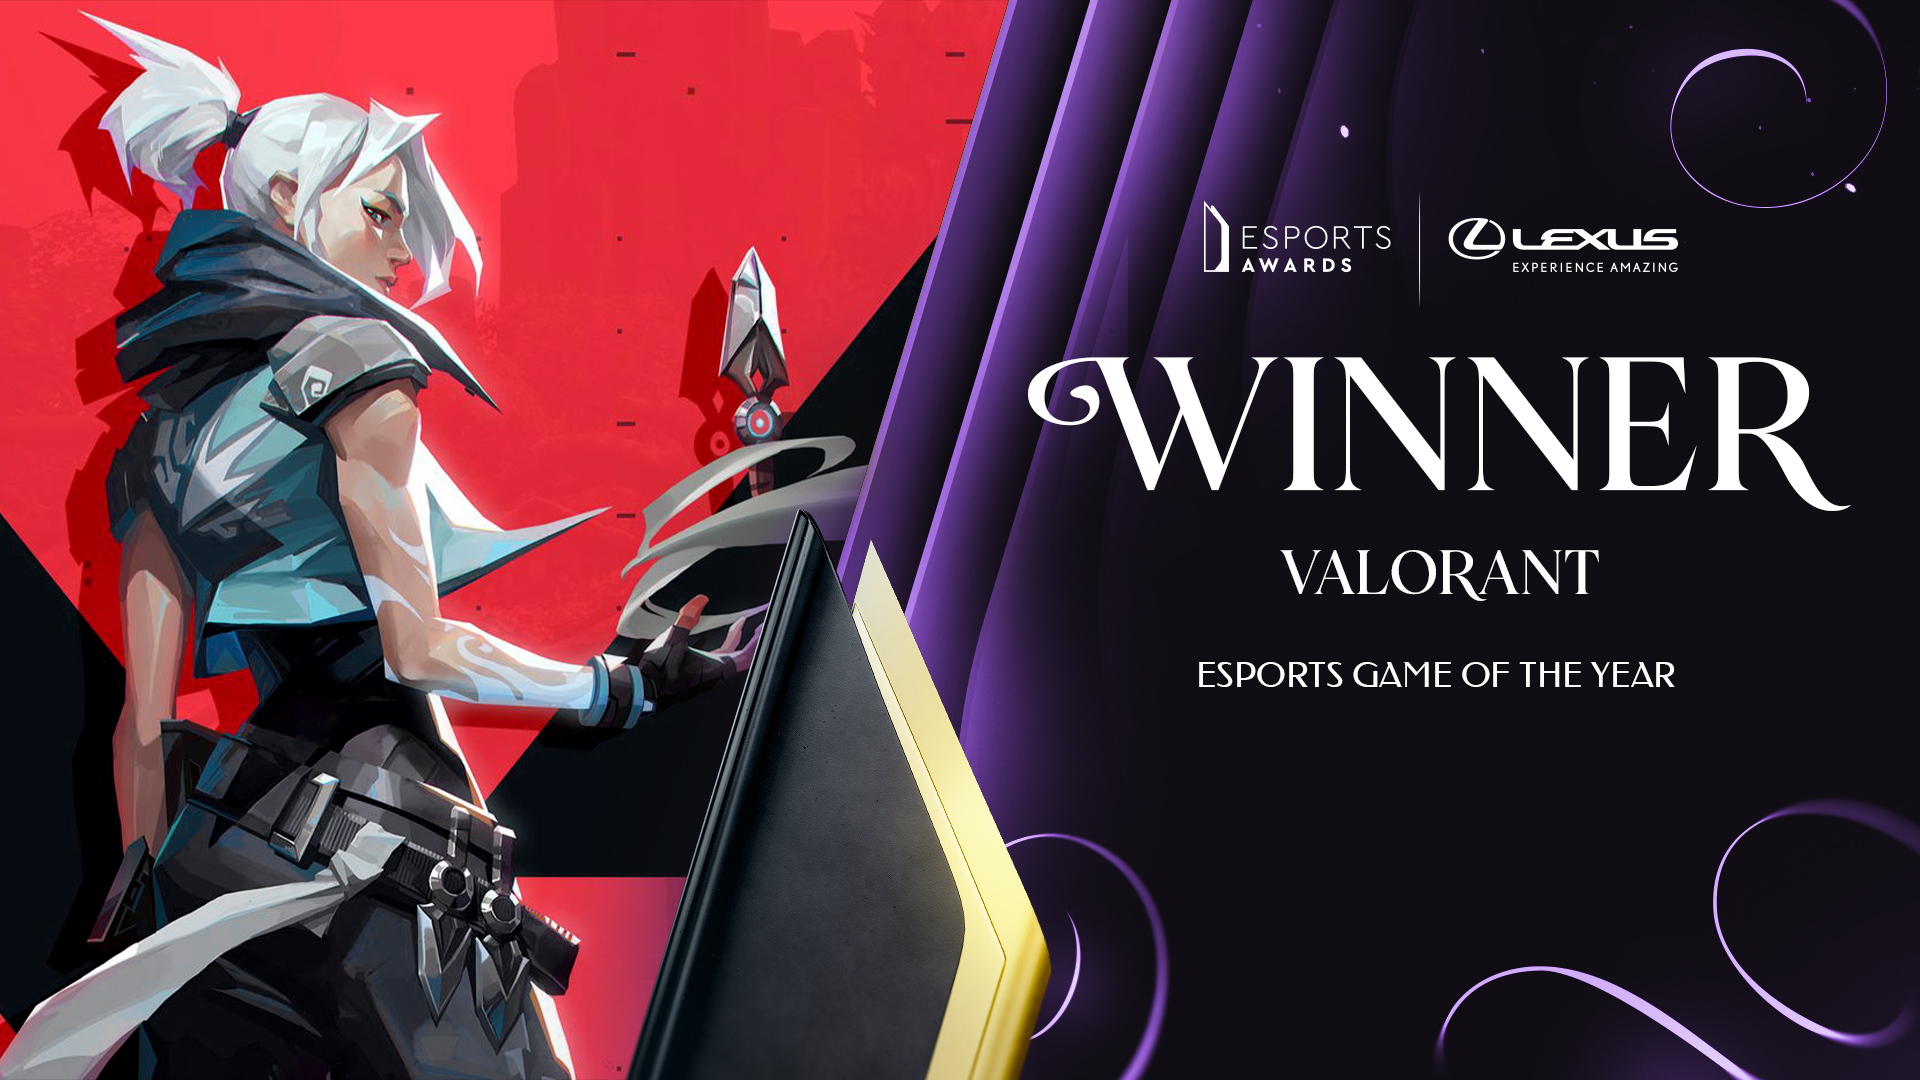 Esports Game of the Year: Valorant